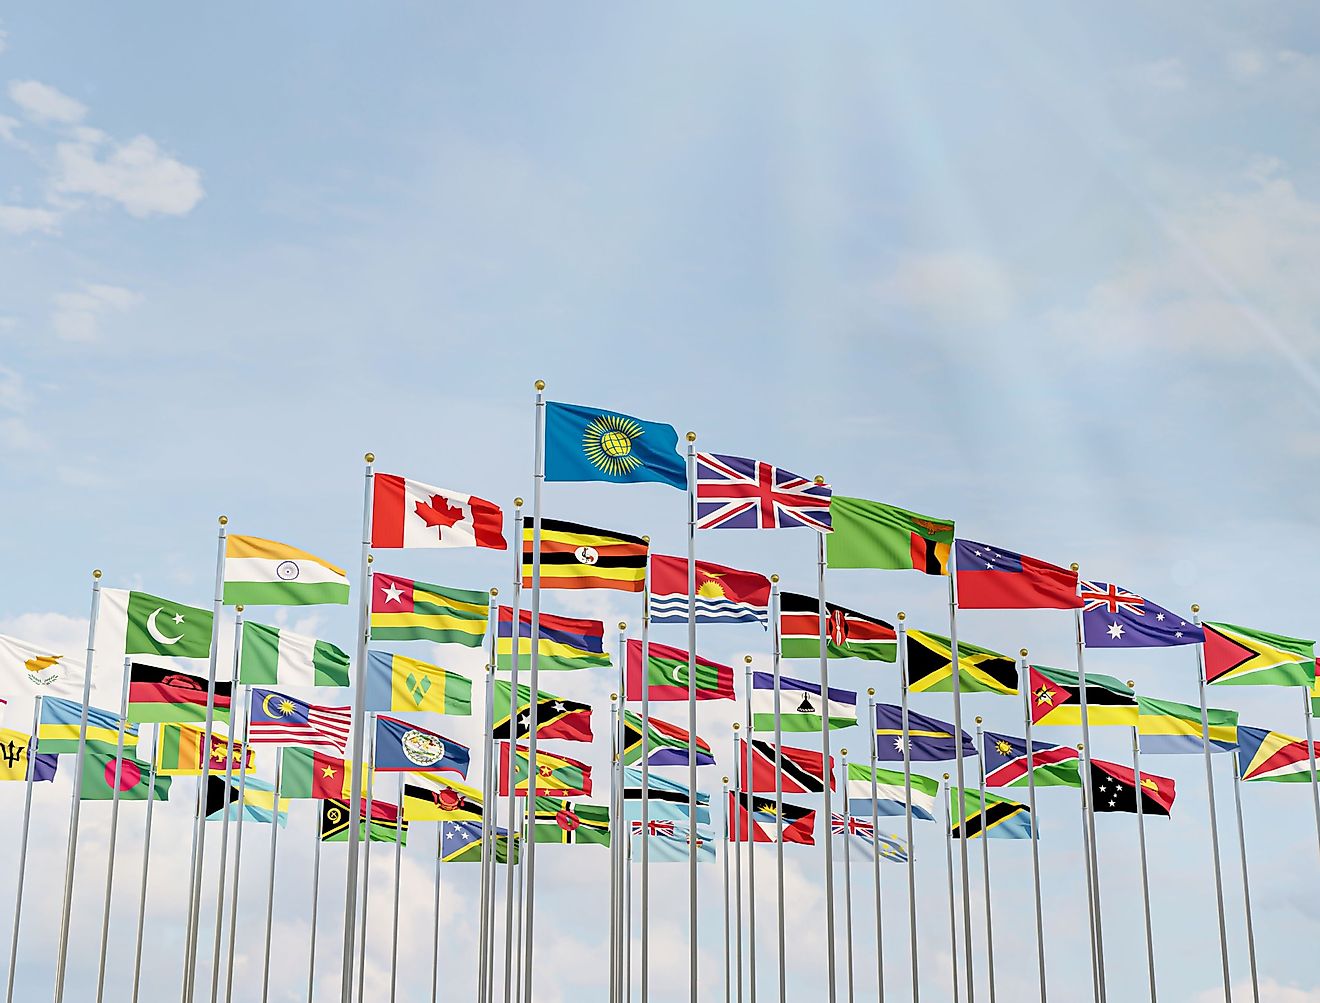 Flags of the Commonwealth of Nations. Image credit justit via shutterstock